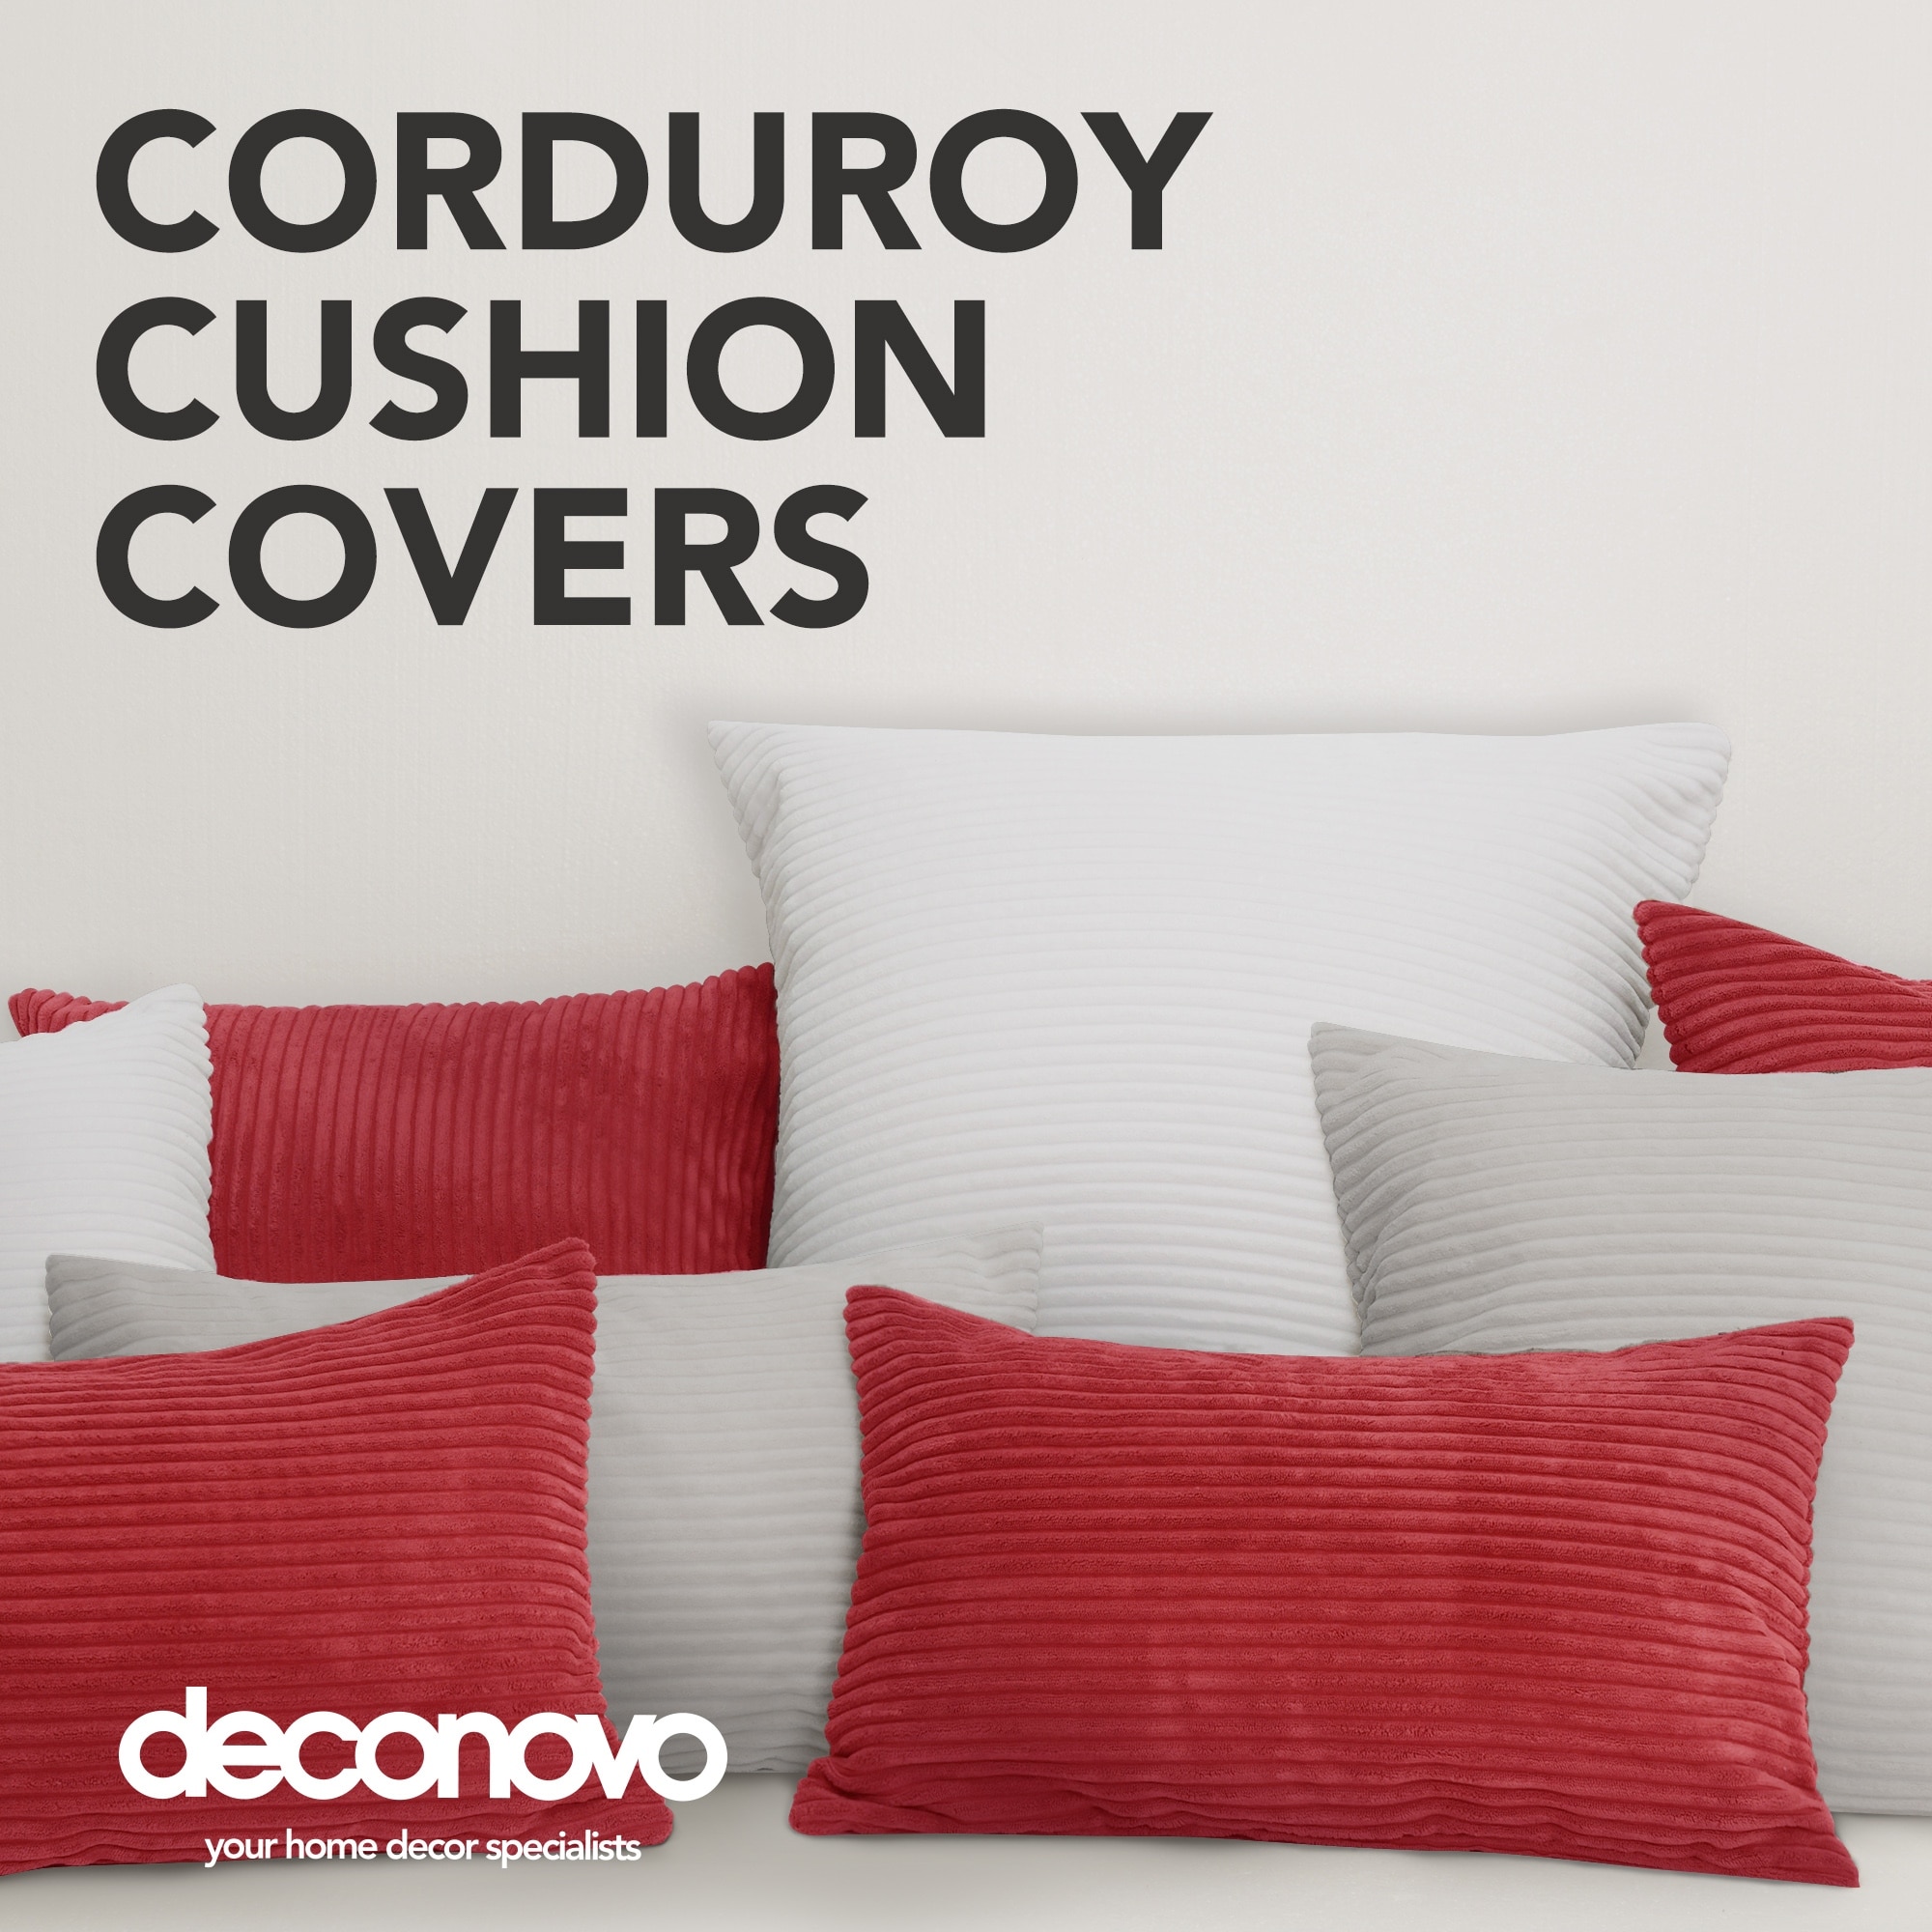 https://ak1.ostkcdn.com/images/products/is/images/direct/a70082f7960235554a5fad4e7b6d01acd7d3262d/Deconovo-Corduroy-Throw-Pillow-Covers-with-Stripe-2-Pieces.jpg